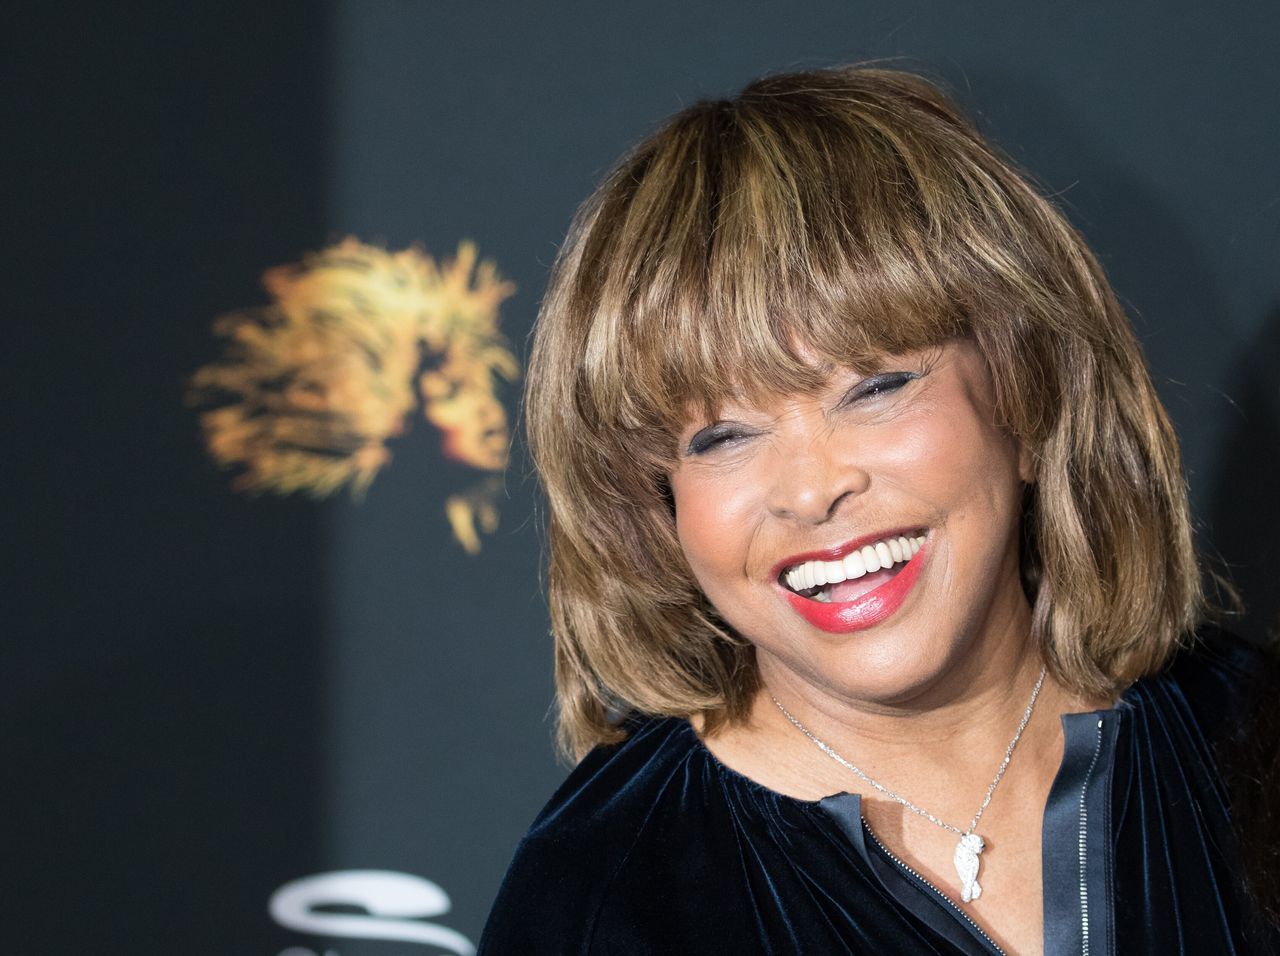 Turner laughs during a photo shoot for the musical "Tina - The Tina Turner Musical" in Hamburg, Germany, on Oct. 23, 2018.